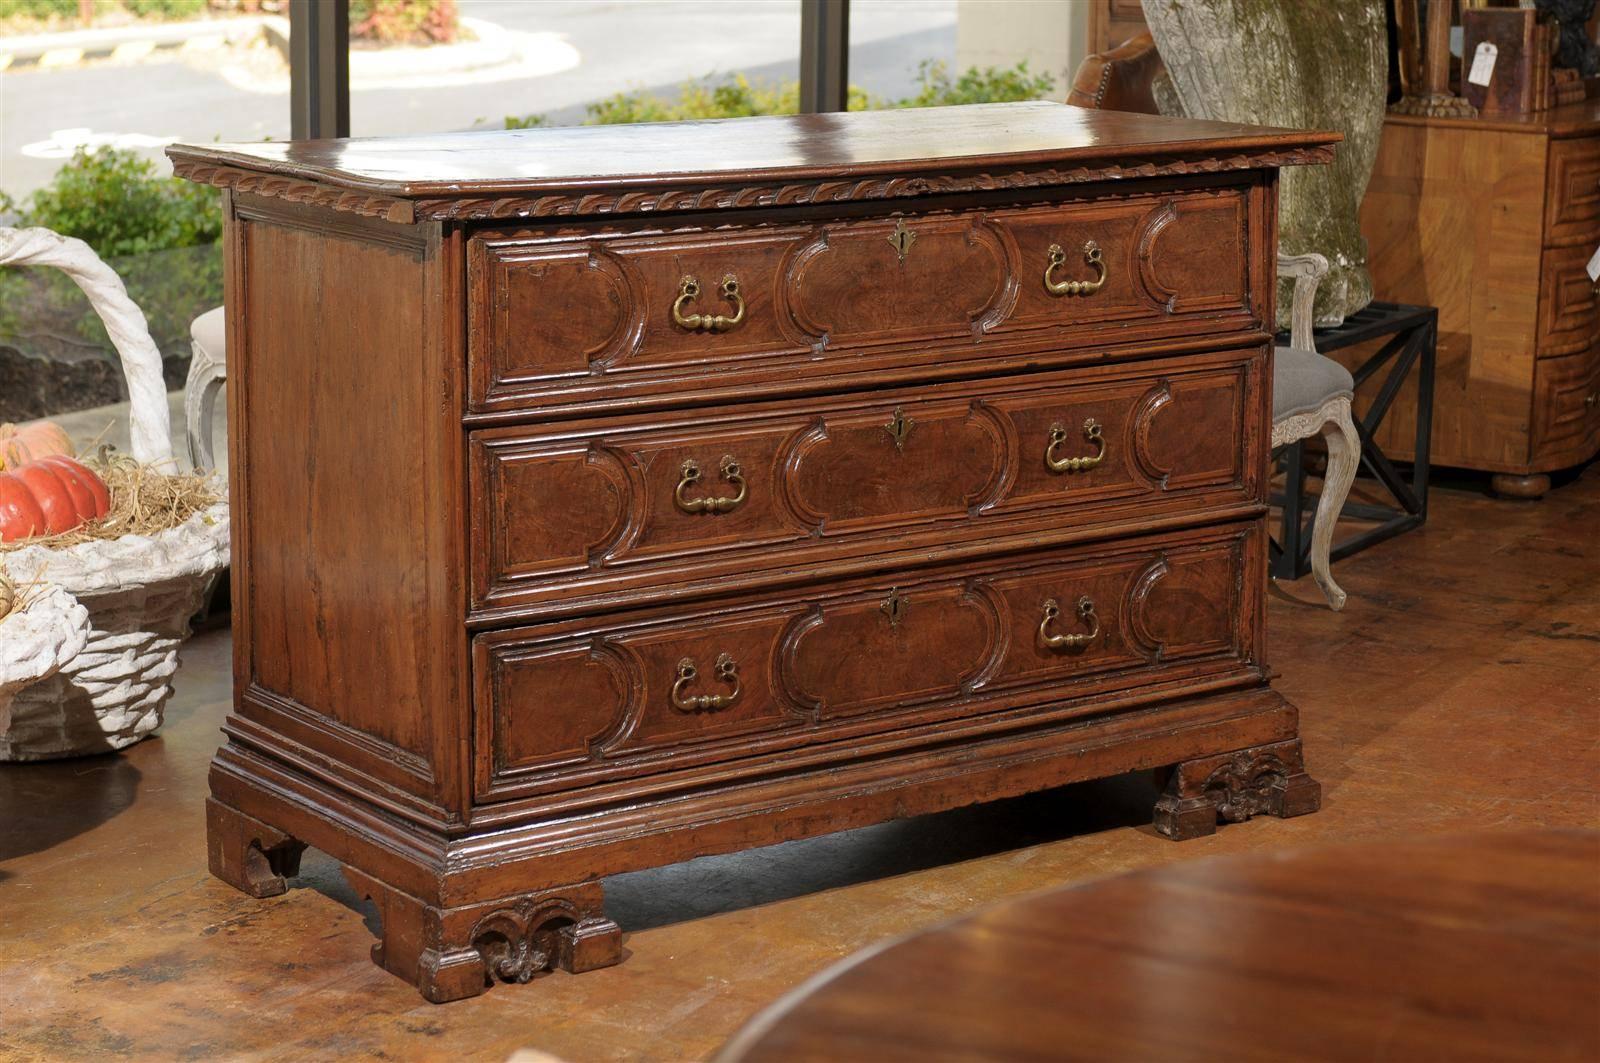 A tall Italian late 18th century carved three-drawer commode with unusual bracket feet. This Italian Neoclassical commode features a rectangular top with a skillfully carved frieze over three geometrical front drawers. Showing perfect symmetry and